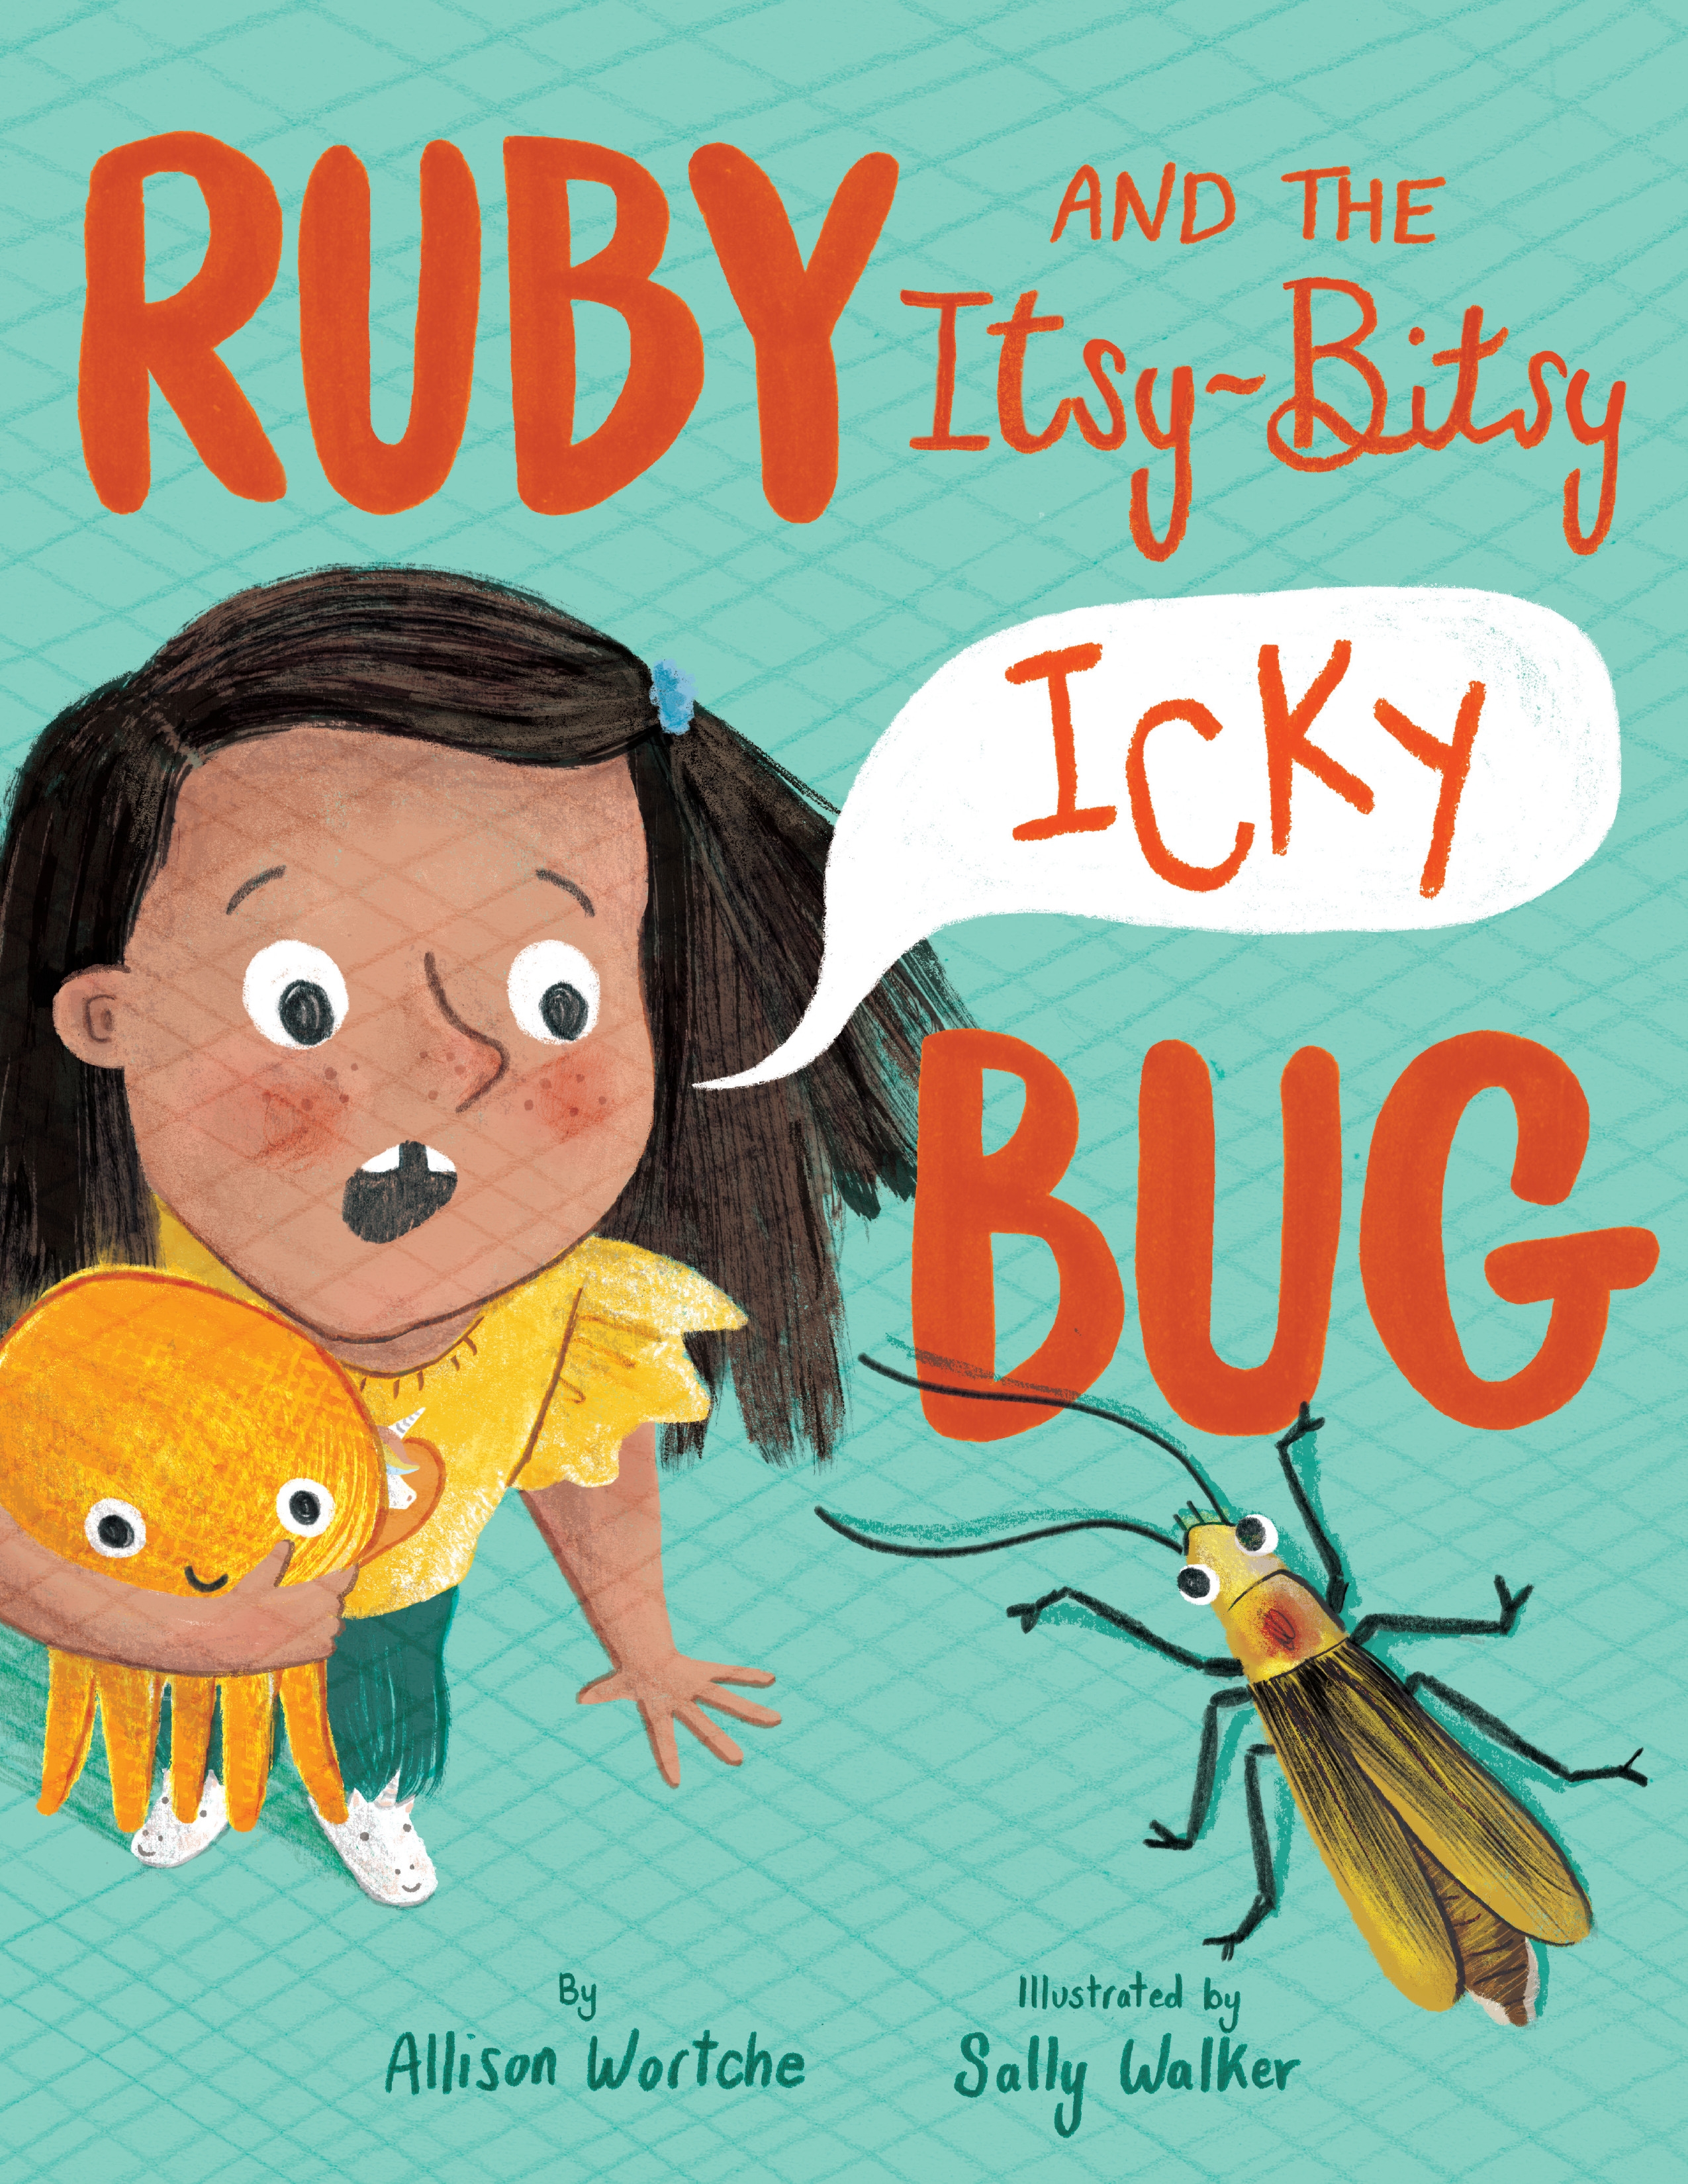 Ruby and the Itsy-Bitsy (Icky) Bug by Allison Wortche - Penguin